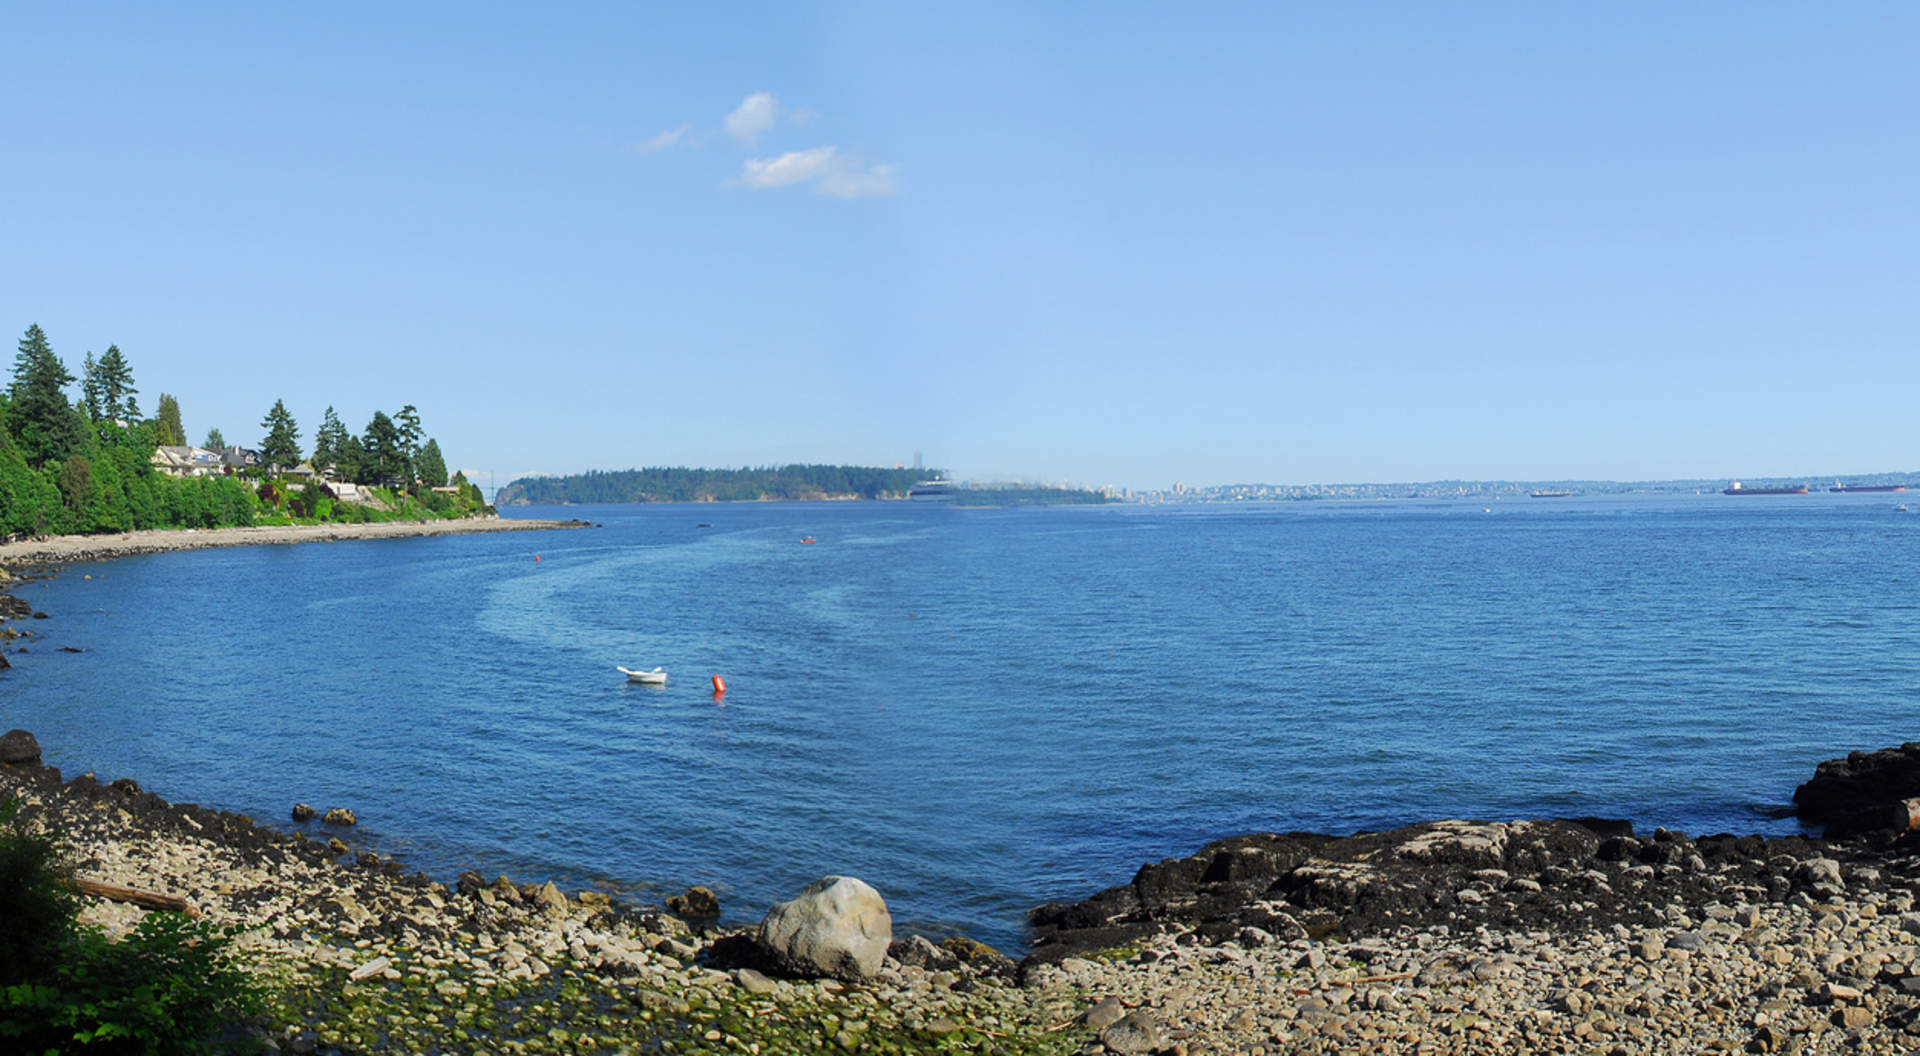 Fabulous Ocean Views to the City, Stanley Park, and West Vancouver's Coastline